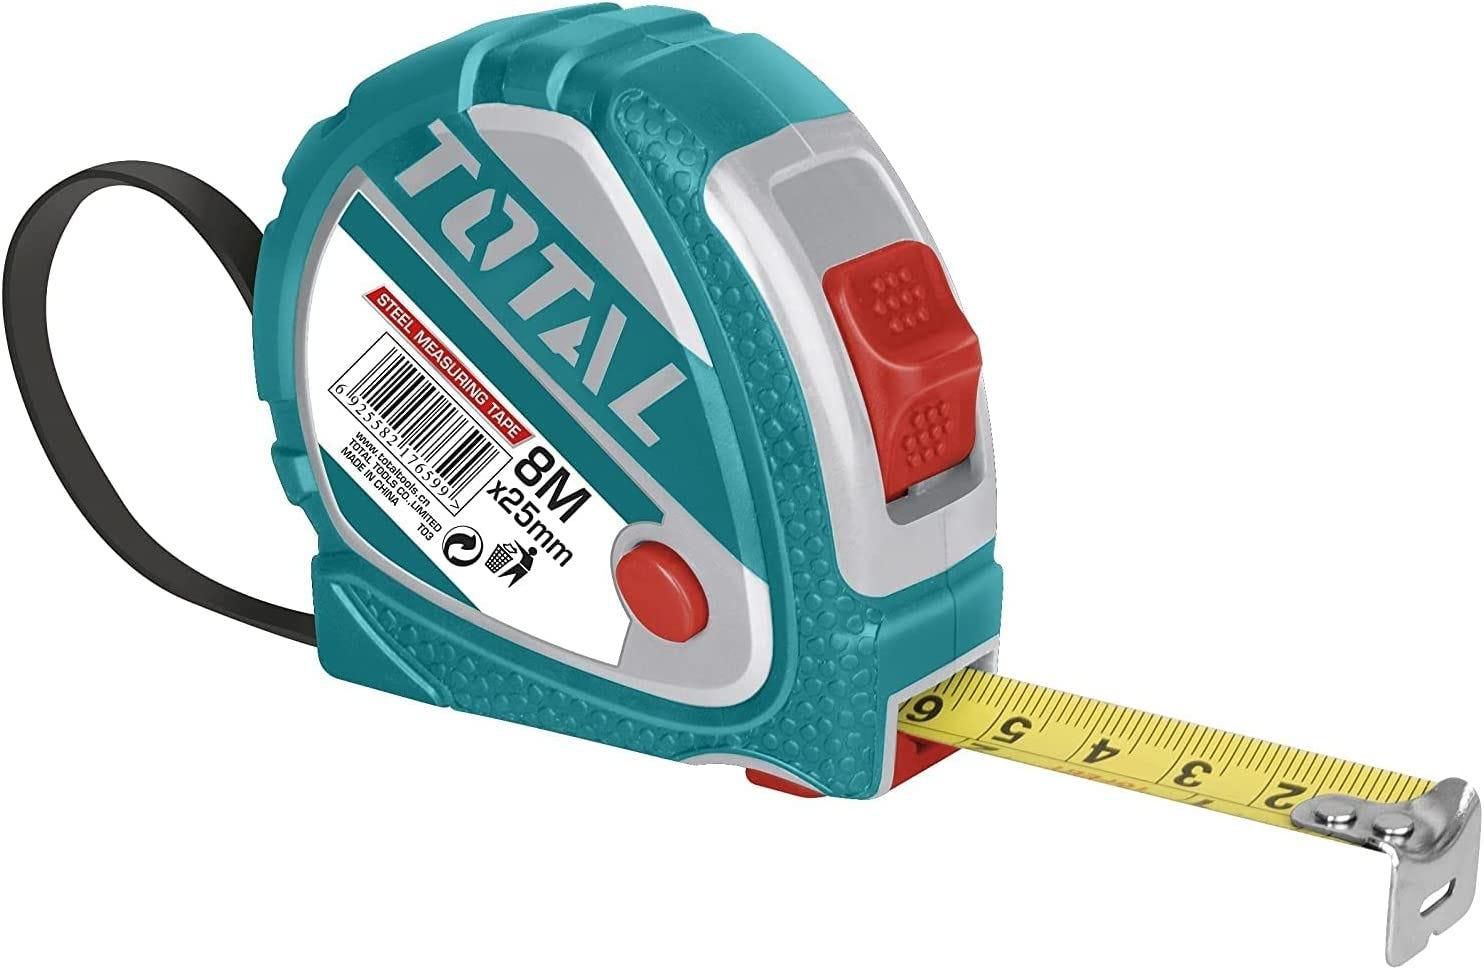 Get Total TMT126081 Steel Measuring Tape, 800 X 2.5 Cm - Multicolor with best offers | Raneen.com